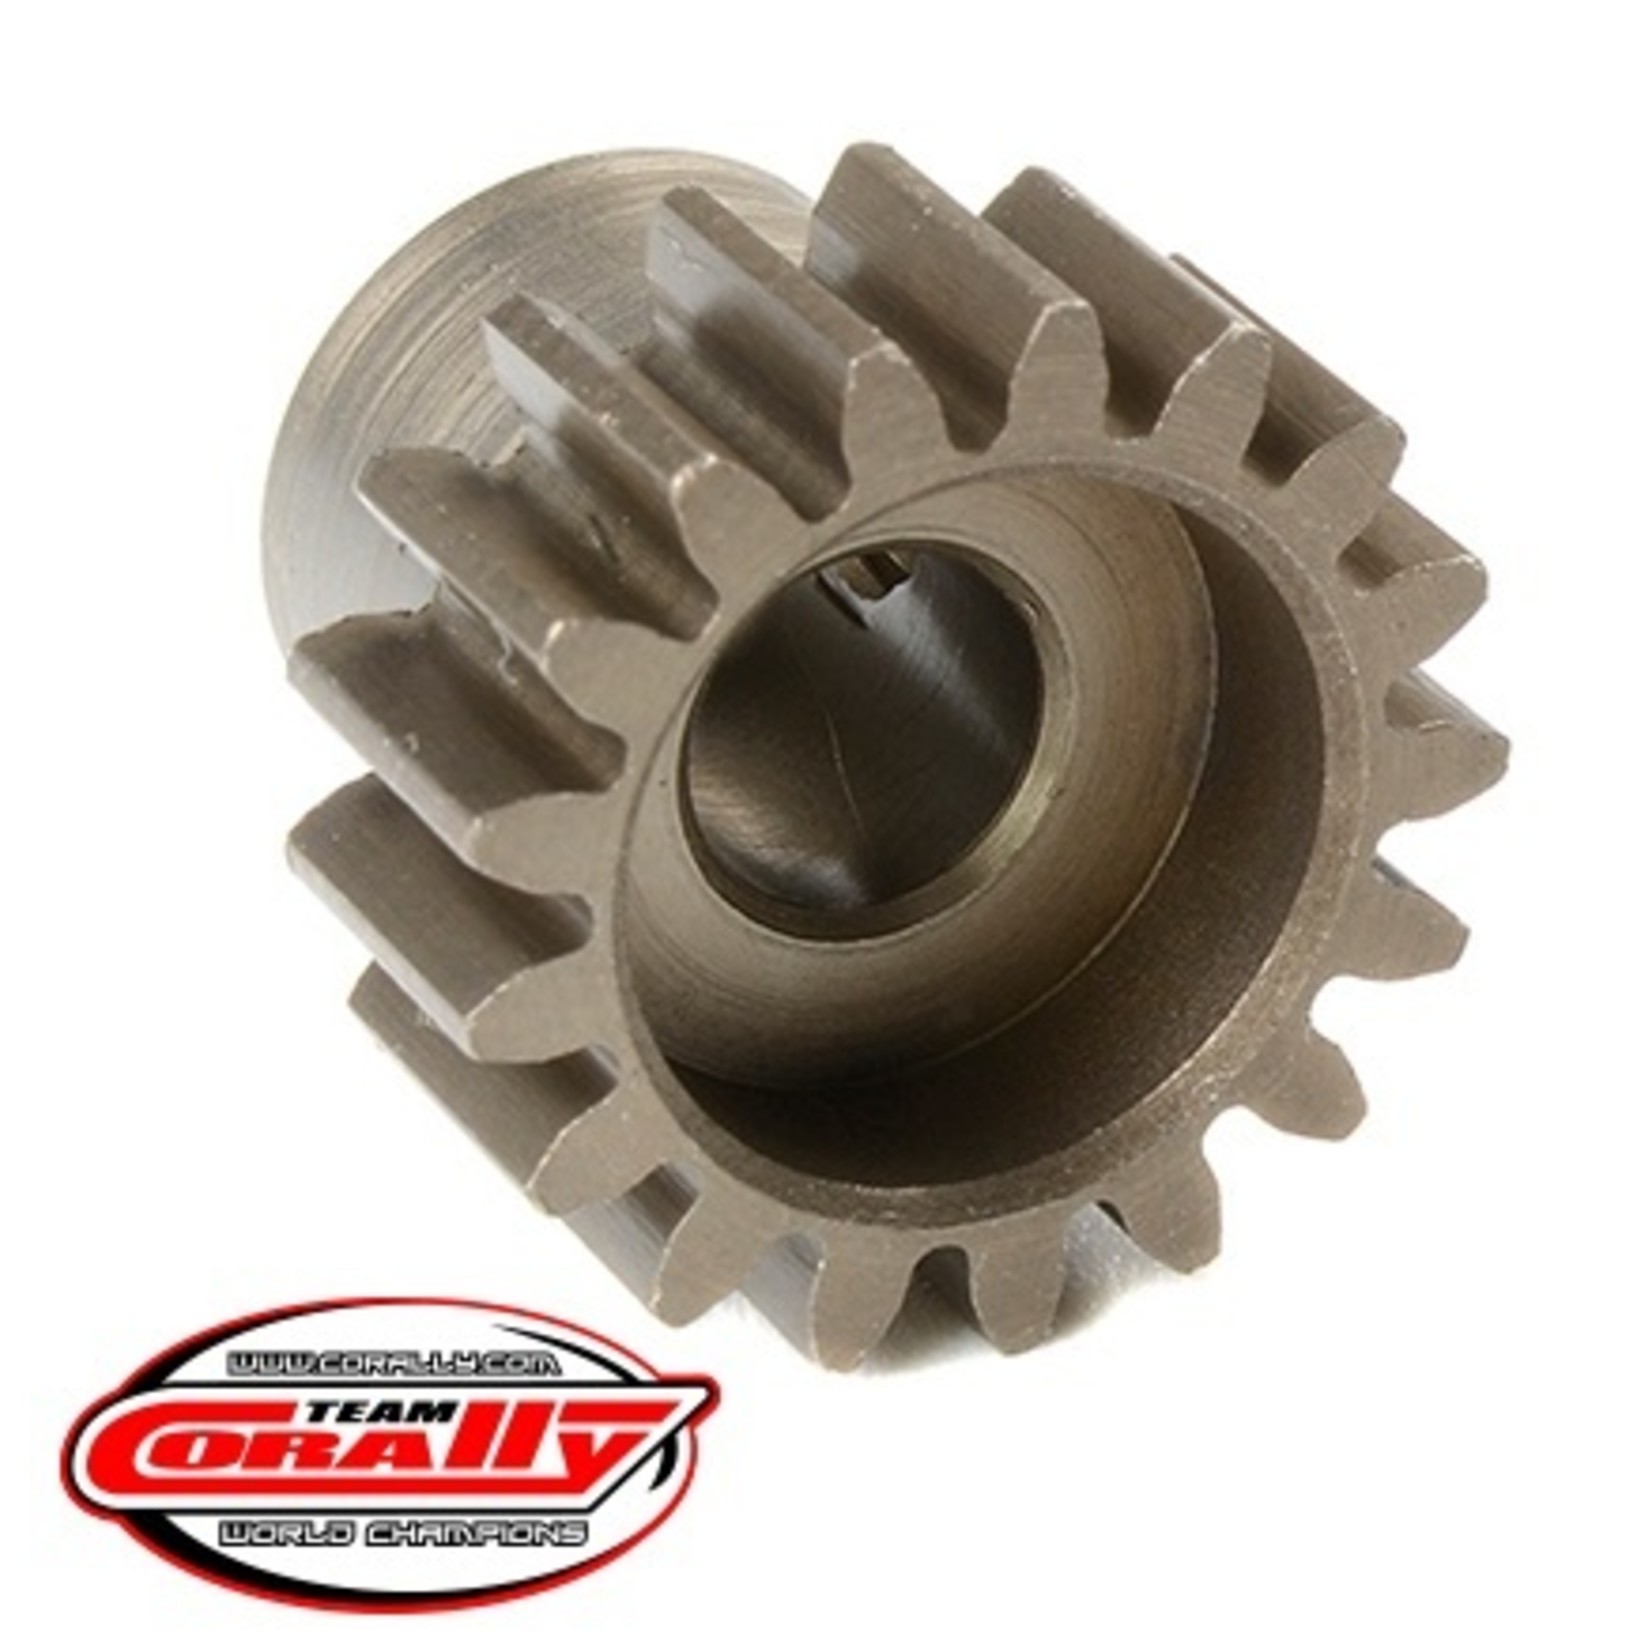 Corally (Team Corally) 32 Pitch Pinion - Short - Hardened Steel - 17 Tooth -